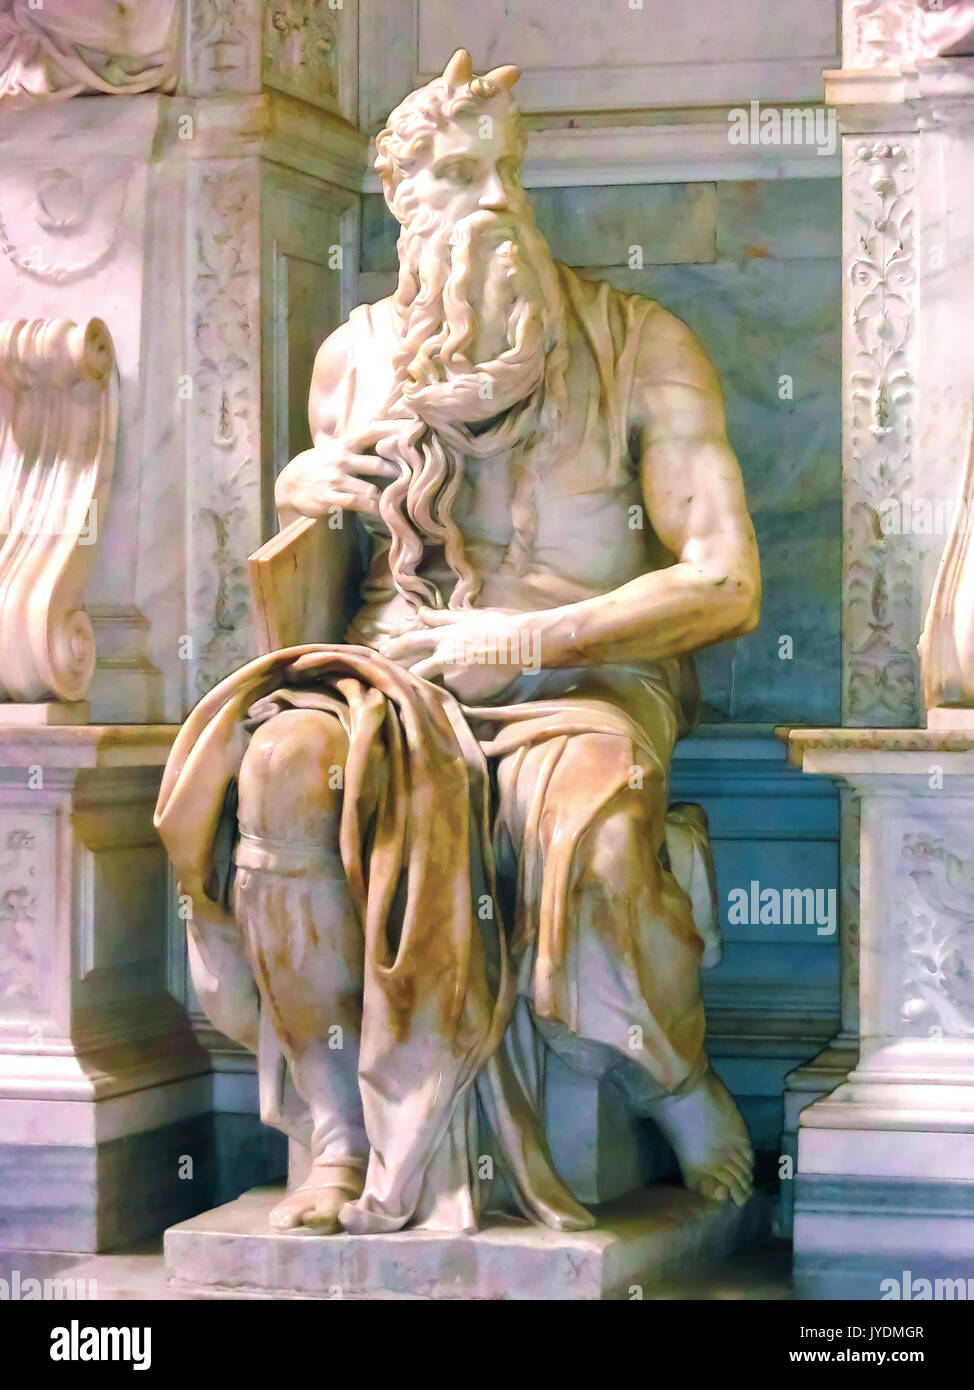 Rome, Italy - May 02, 2014: The statue of Moses sculpted by Michelangelo Stock Photo